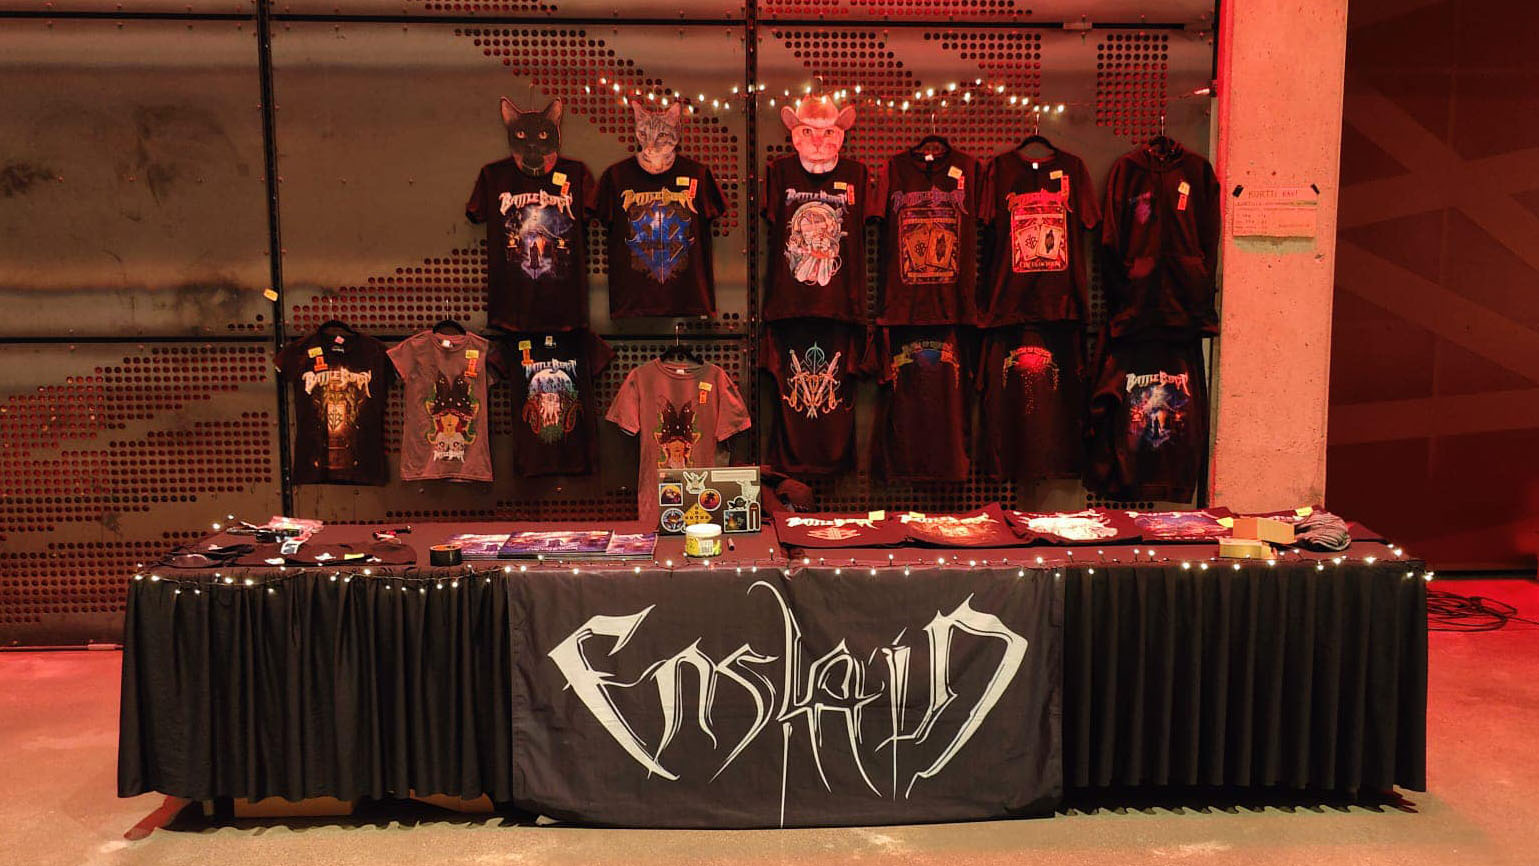 Large display of Battle Beast merchandise consisting of t-shirts and hoodies hanging on a wall, as well as vinyls, fabric shopping bags and beanines on a tablet. Enslain's company banner is hanging off the side of the table.